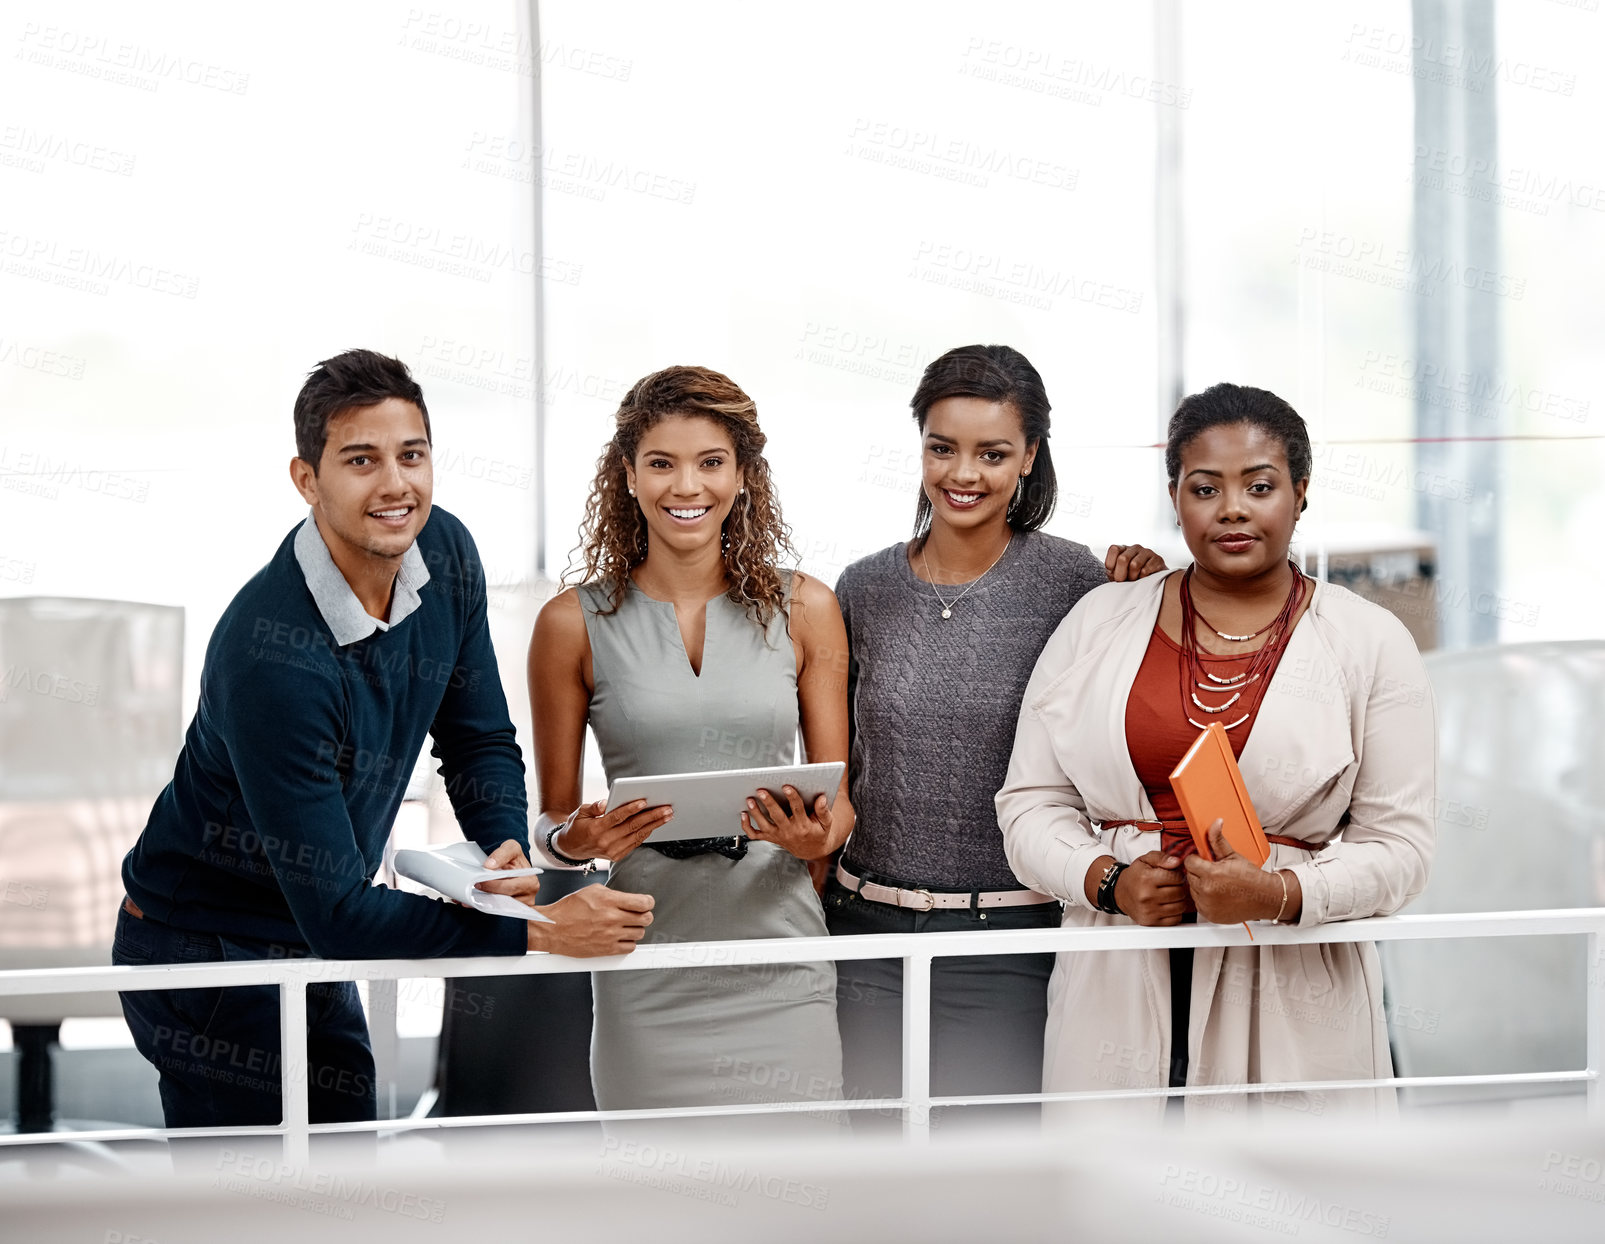 Buy stock photo Shot of a diverse young group of colleagues standing together in the office and smiling at the camera